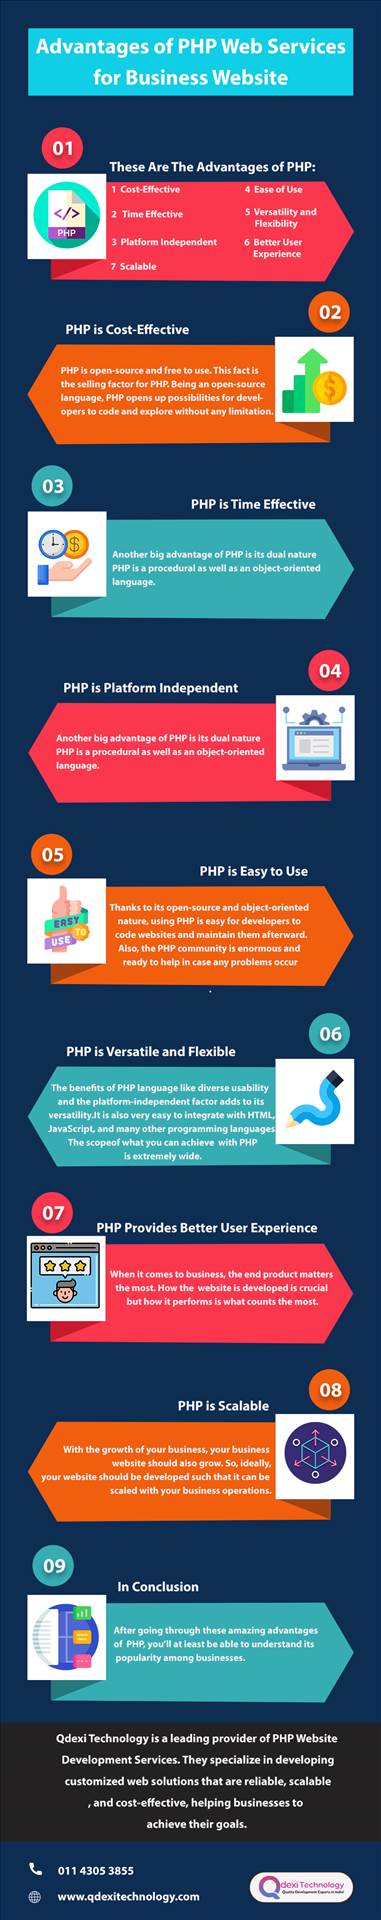 infographic-design-for-qdexi- (1).jpg  by Qdexitechnology